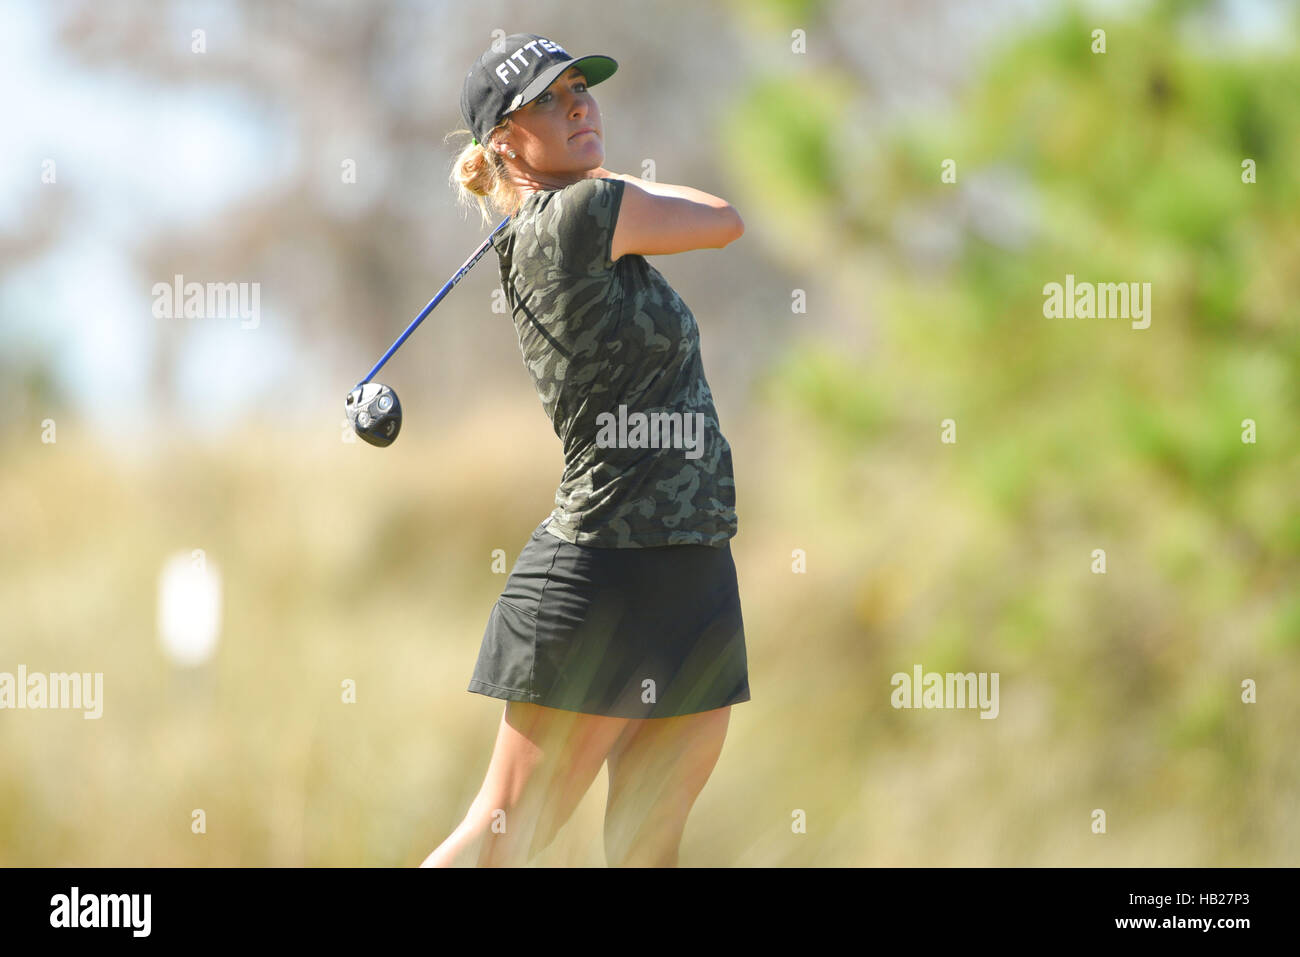 Daytona Beach, Florida, USA. 4th Dec, 2016. Jaye Marie Green during the final round of LPGA Q-School Stage 3 on the Hills Course at LPGA International in Daytona Beach, Florida on Dec. 4, 2016.ZUMA Press/Scott A. Miller Credit:  Scott A. Miller/ZUMA Wire/Alamy Live News Stock Photo